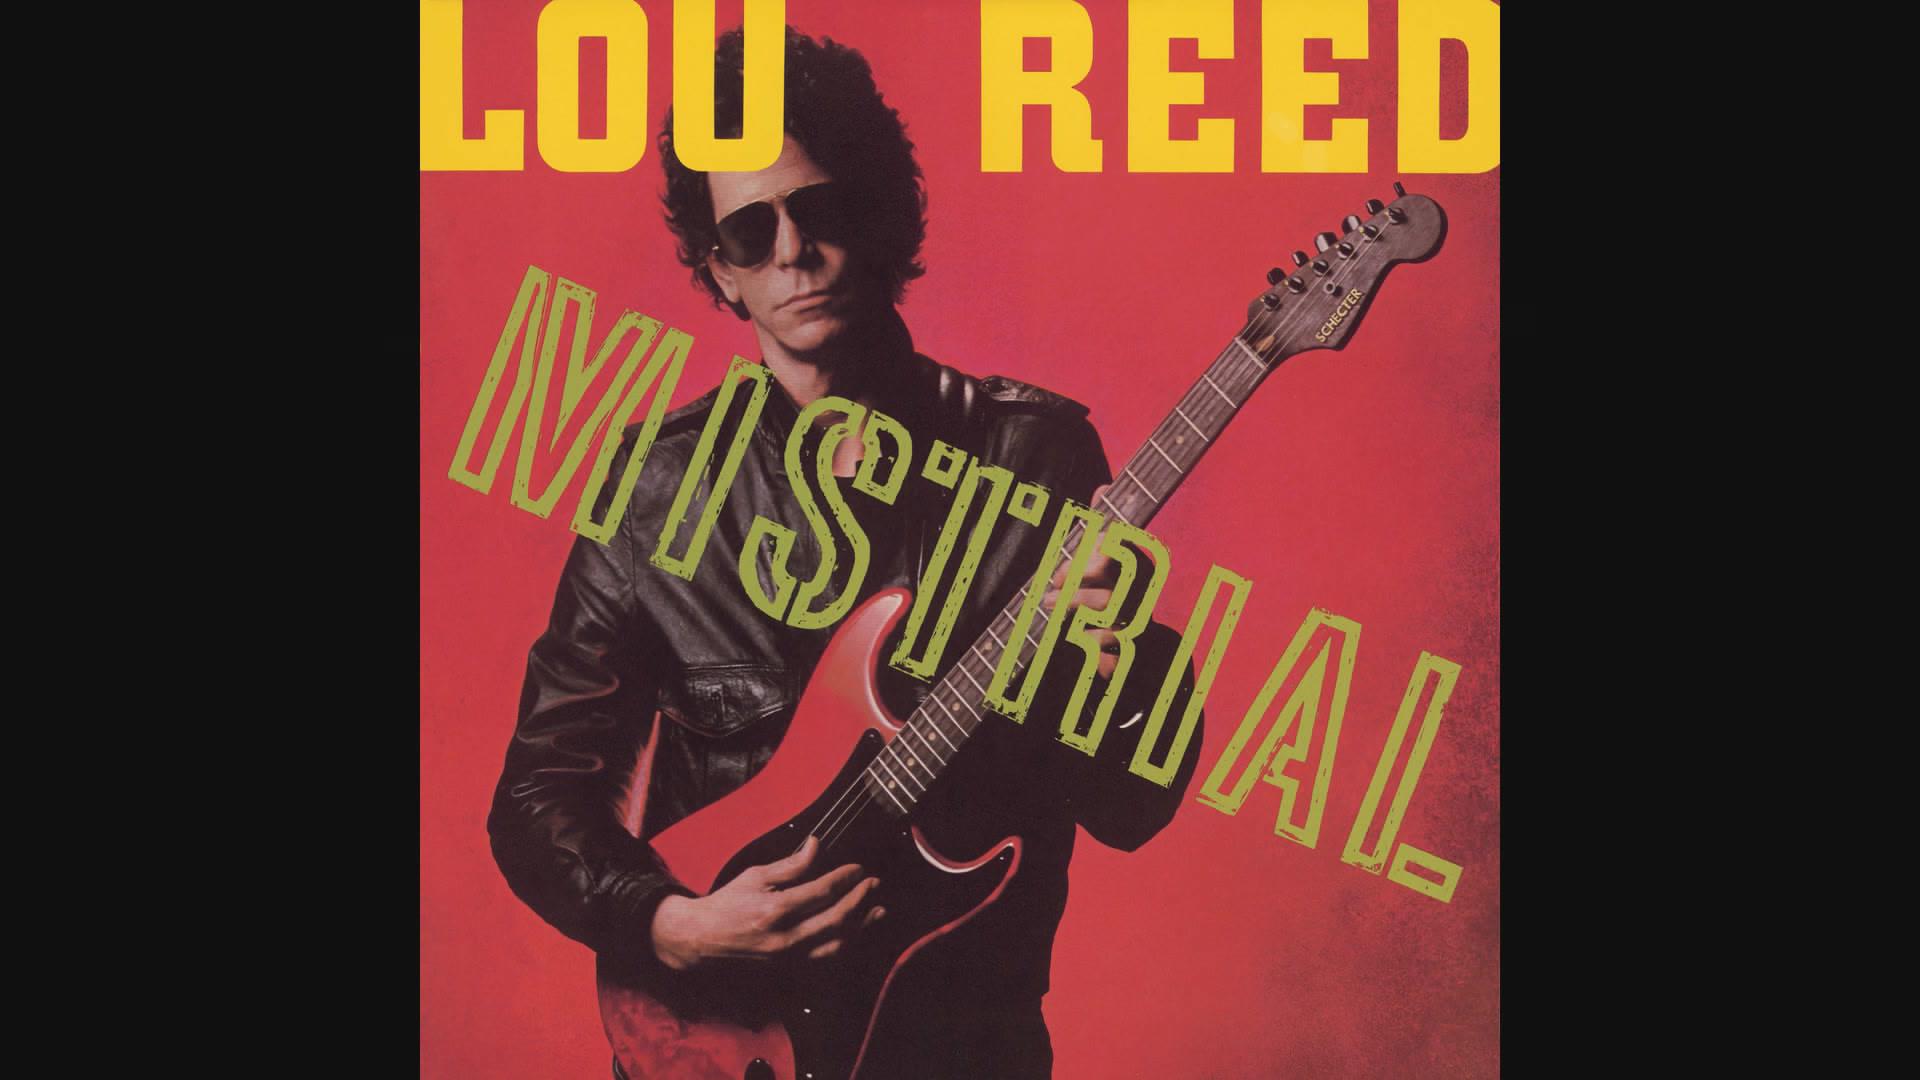 Lou Reed - Video Violence (audio)